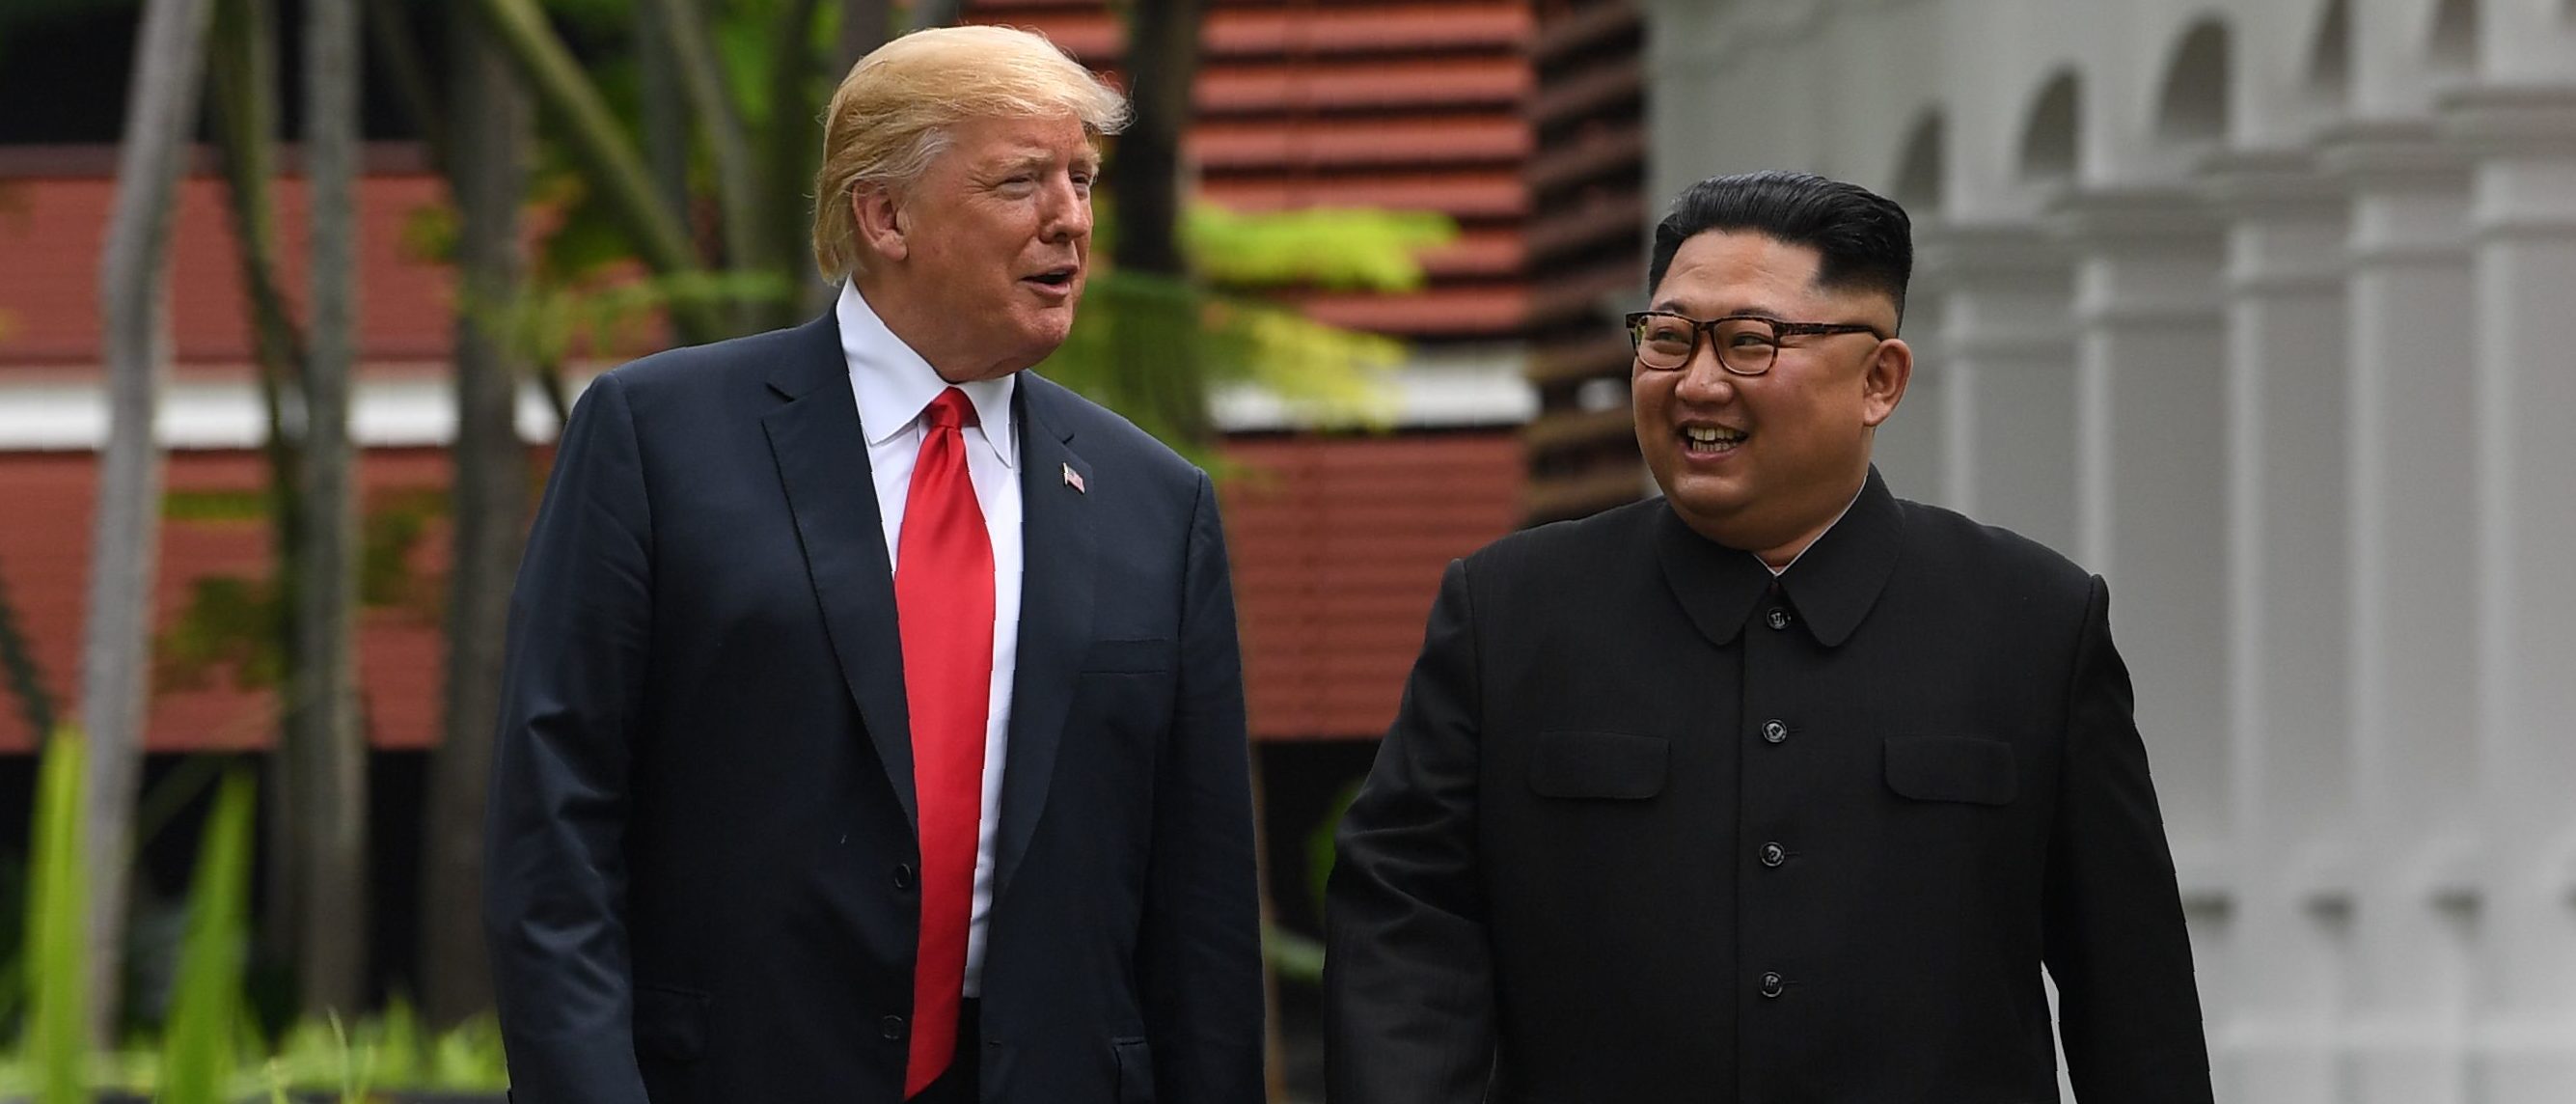 North Korea's leader Kim Jong Un (R) walks with US President Donald Trump (L) during a break in talks at their historic US-North Korea summit, at the Capella Hotel on Sentosa island in Singapore on June 12, 2018. (Photo credit should read SAUL LOEB/AFP/Getty Images)